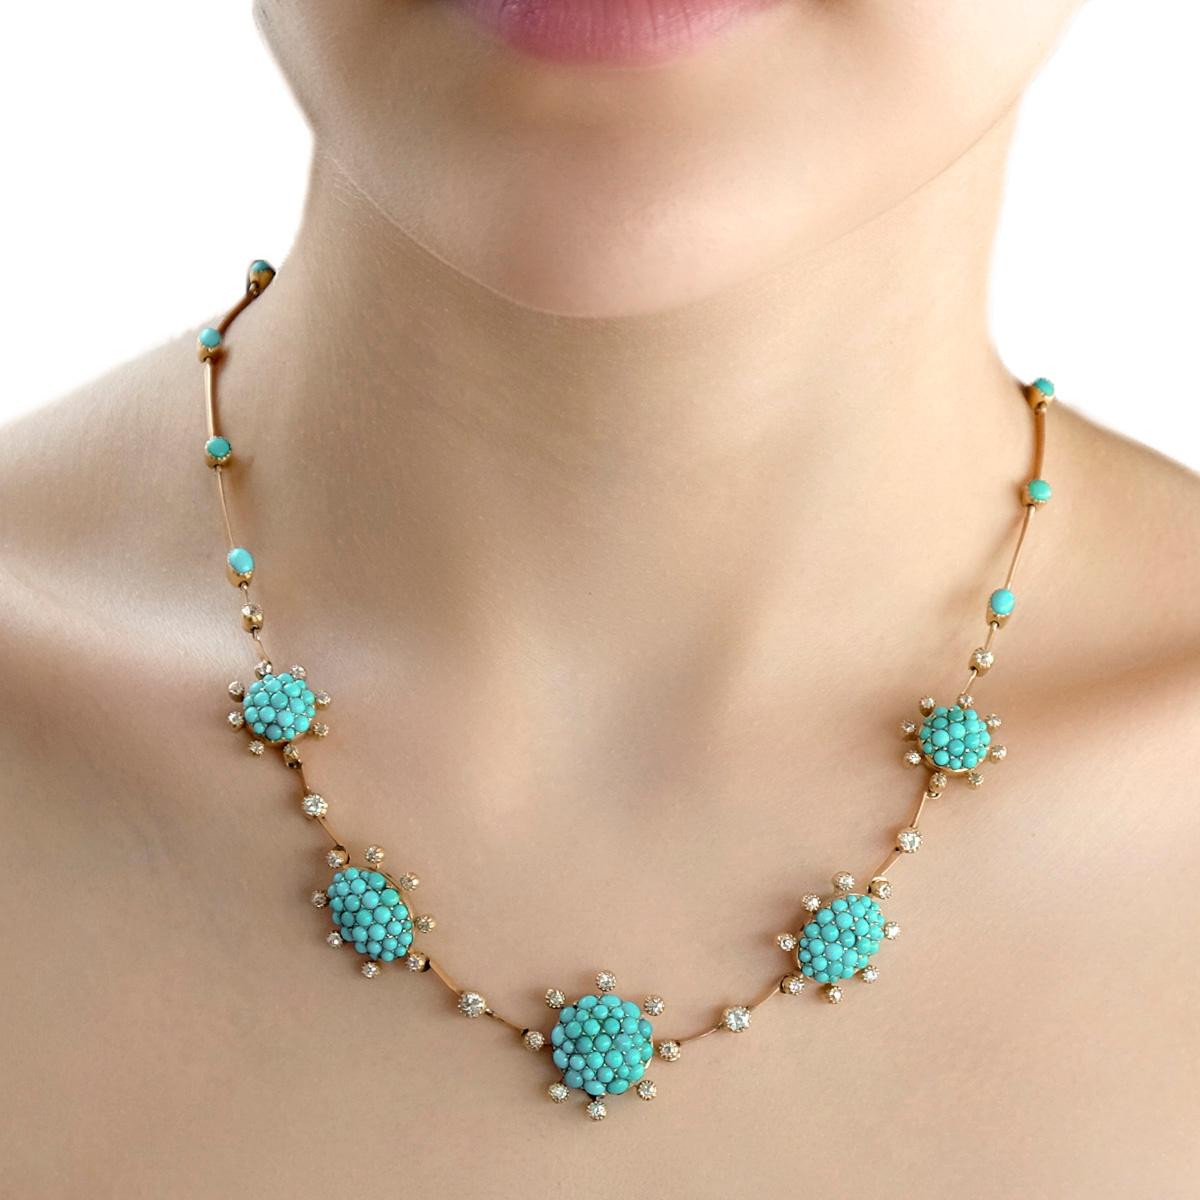 Victorian 18 Karat Gold and Persian Turquoise and 2.2cts Old European Diamond Necklace
Sure one-of-a-kind this amazing pave turquoise and old euro cut diamond necklace is pure bliss. 
17.5 inches length
34 grams overall weight
